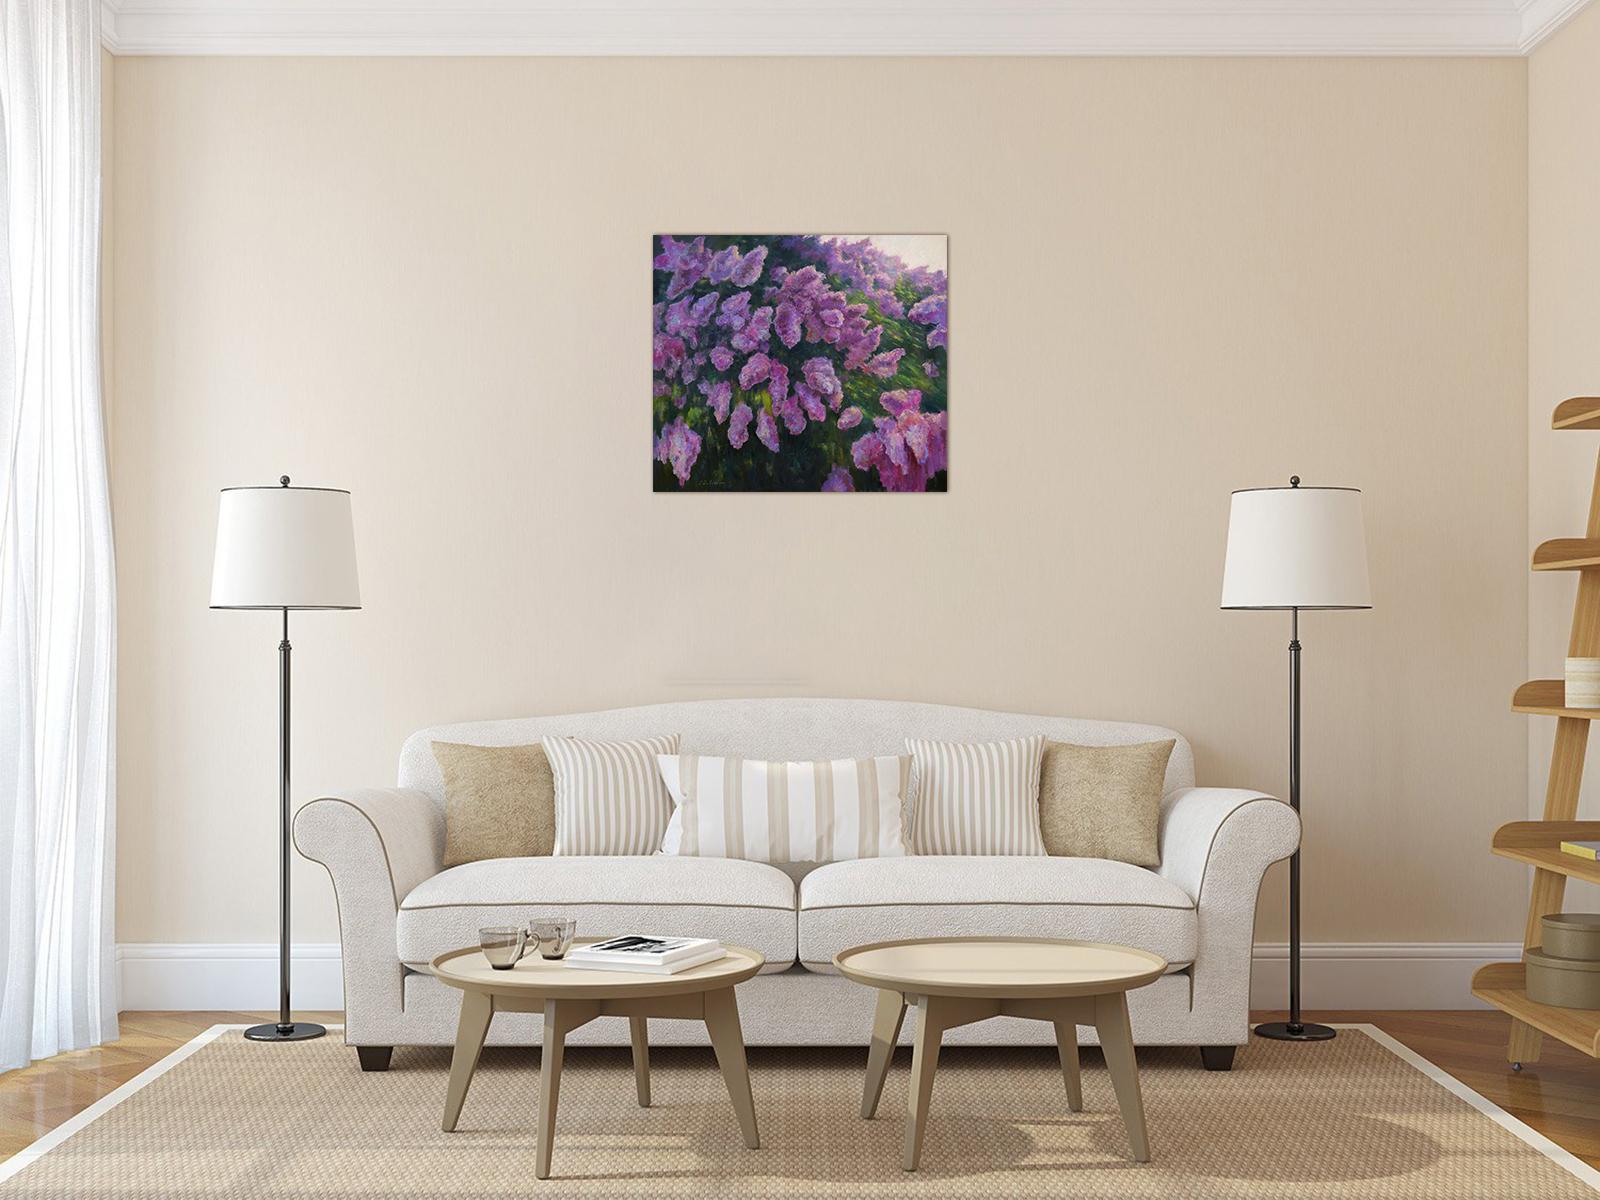 Sunny lilacs painting is a beautiful home decor, purple flowers of blooming tree will fill your home with a wonderful aroma and give you only a good mood. This painting is one of the best artworks of the artist, the combination of different textures